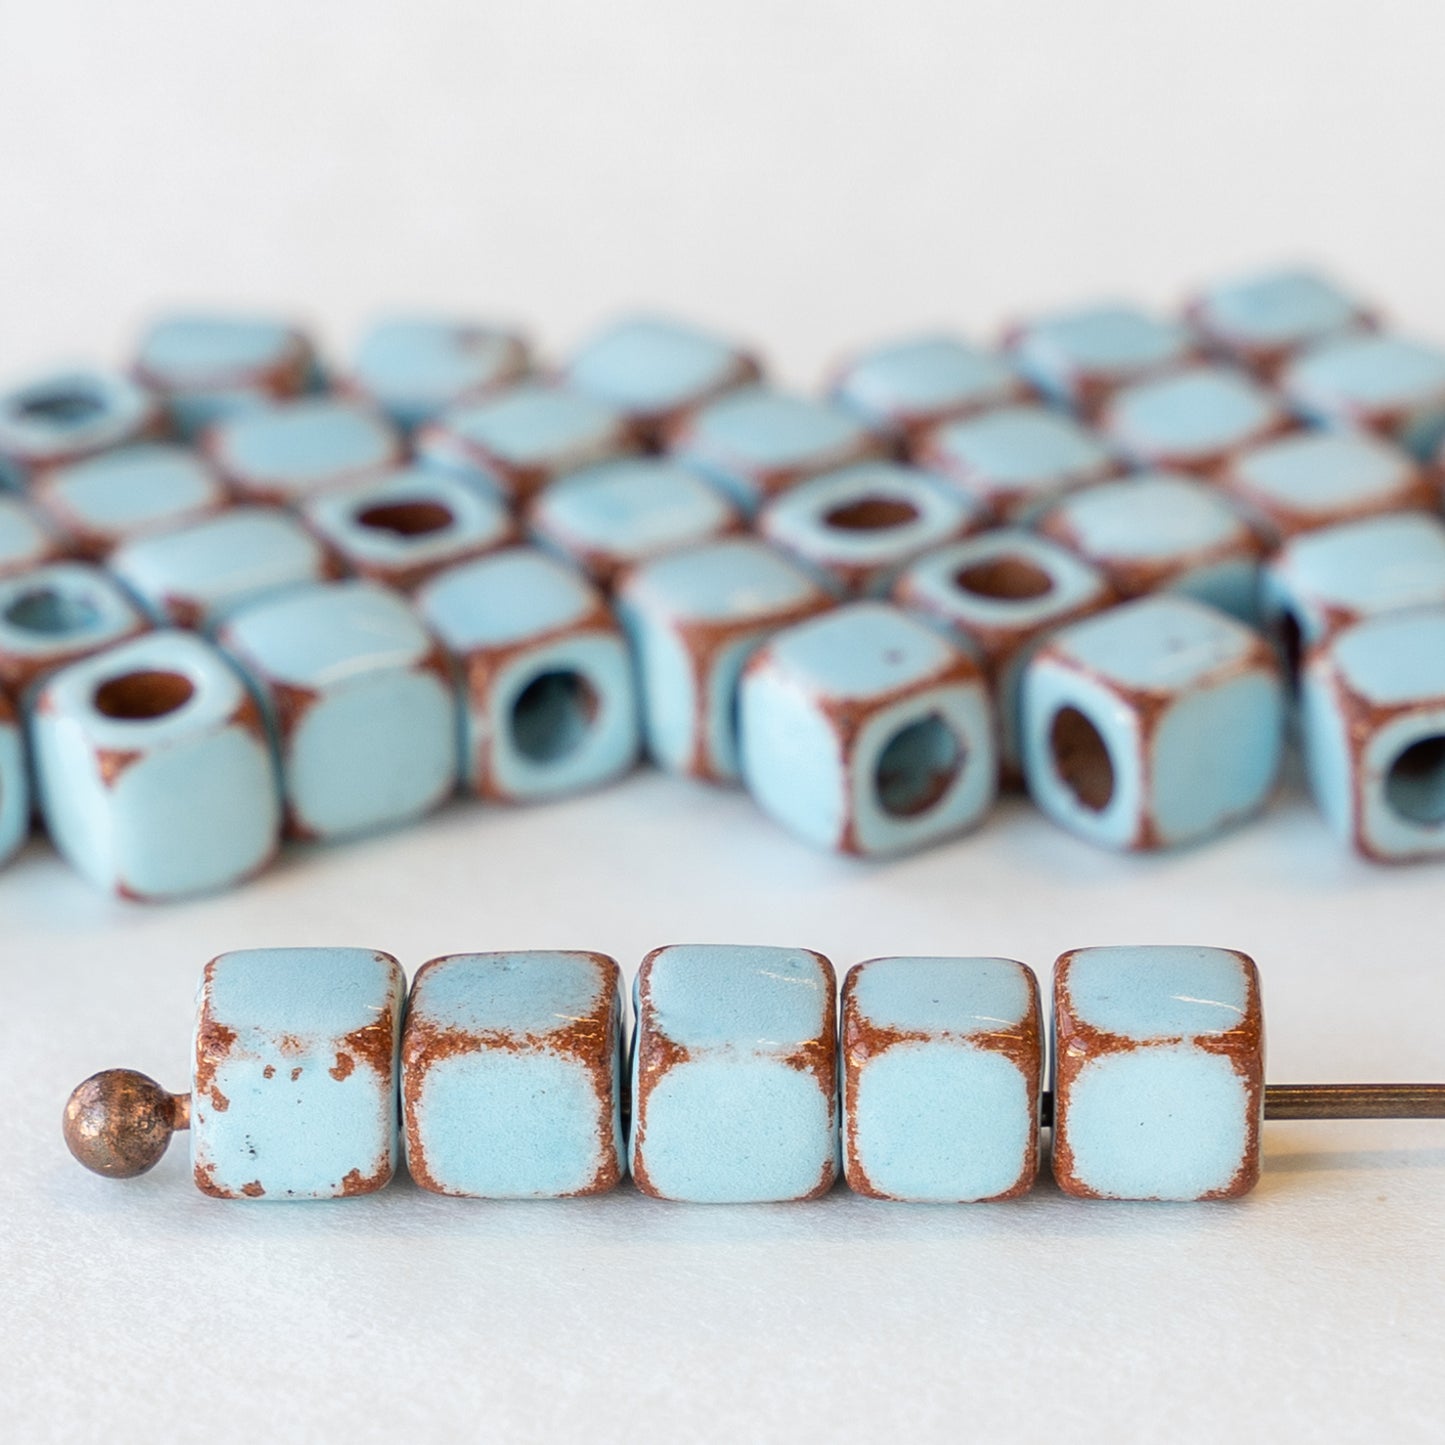 5.5mm Shiny Cube Beads - Baby Blue on Terra Cotta - 10 or 30 beads